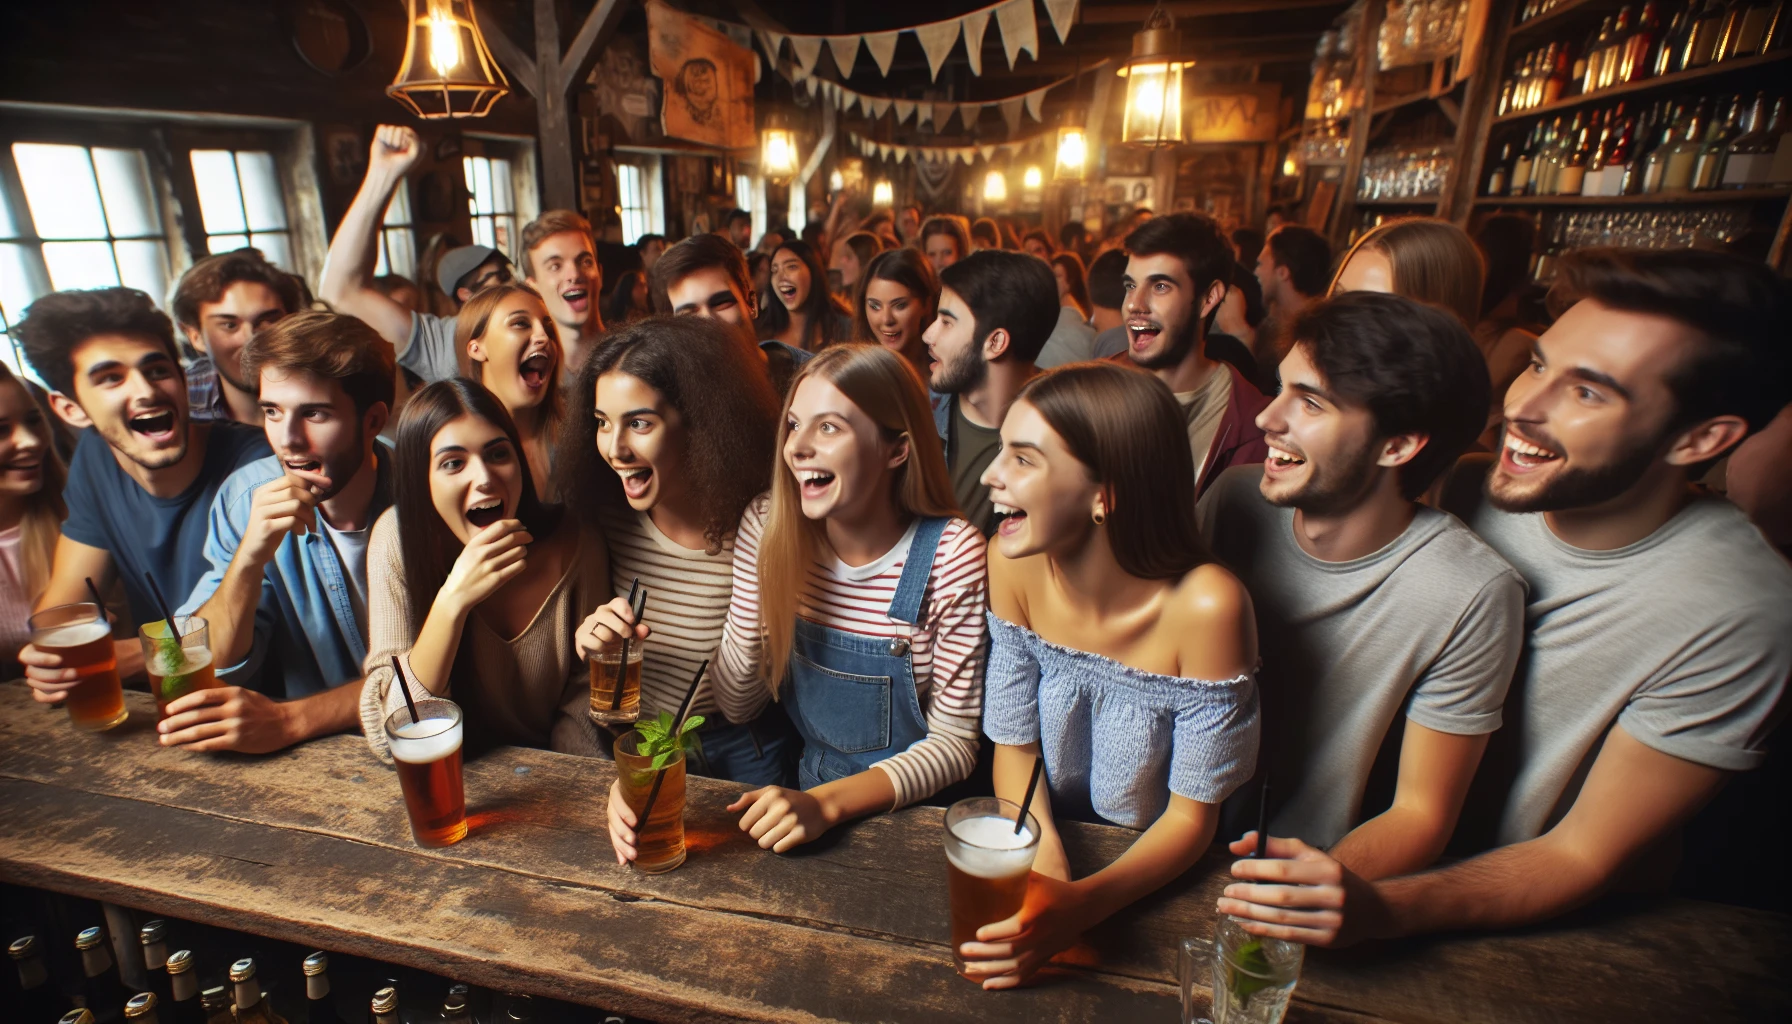 A group of college students socializing at a bar with alcoholic beverages